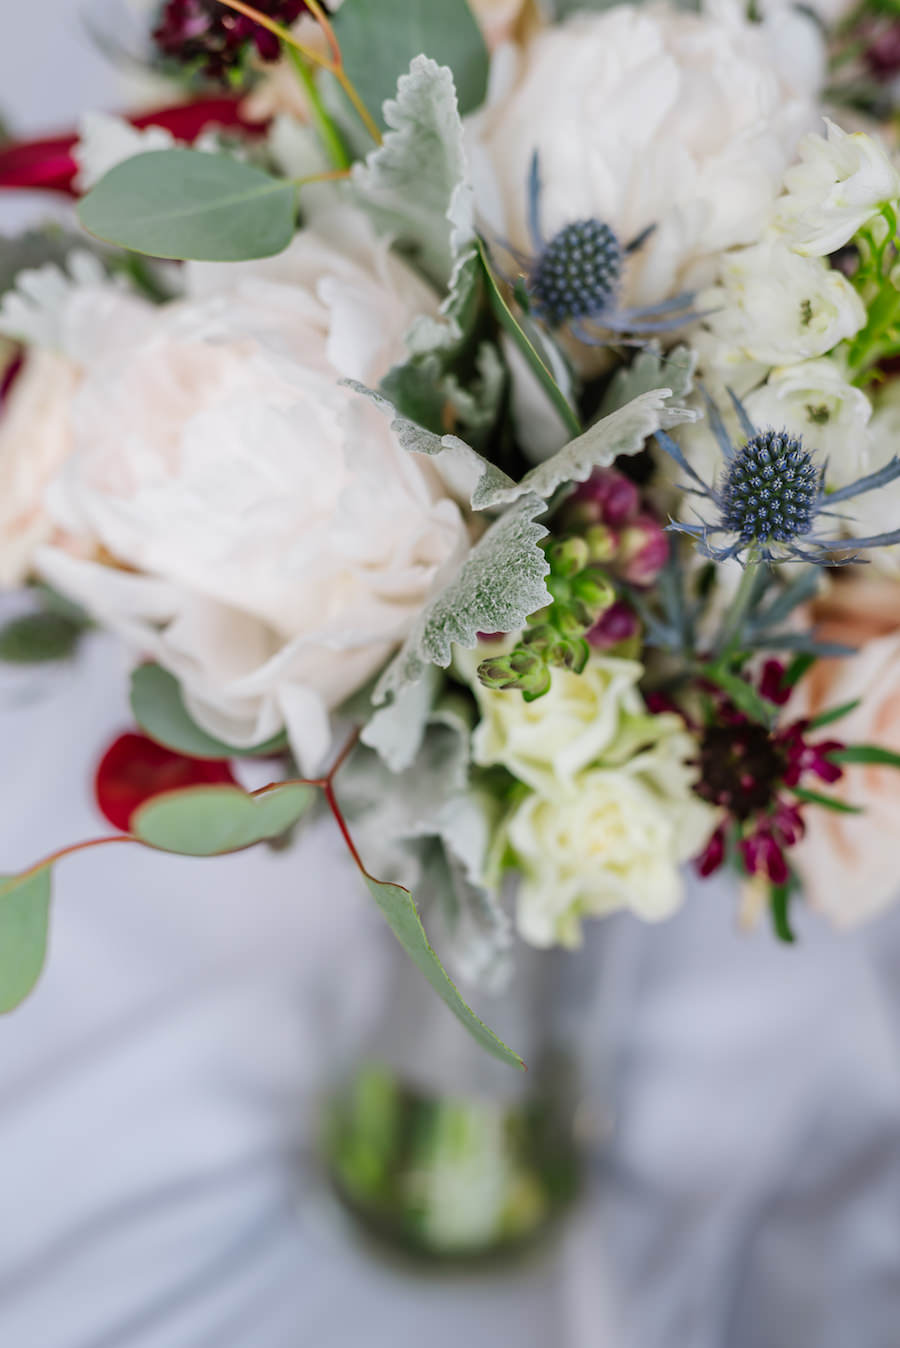 Ivory, Grey and Burgundy Floral Wedding Arrangement with Peonies and Greenery